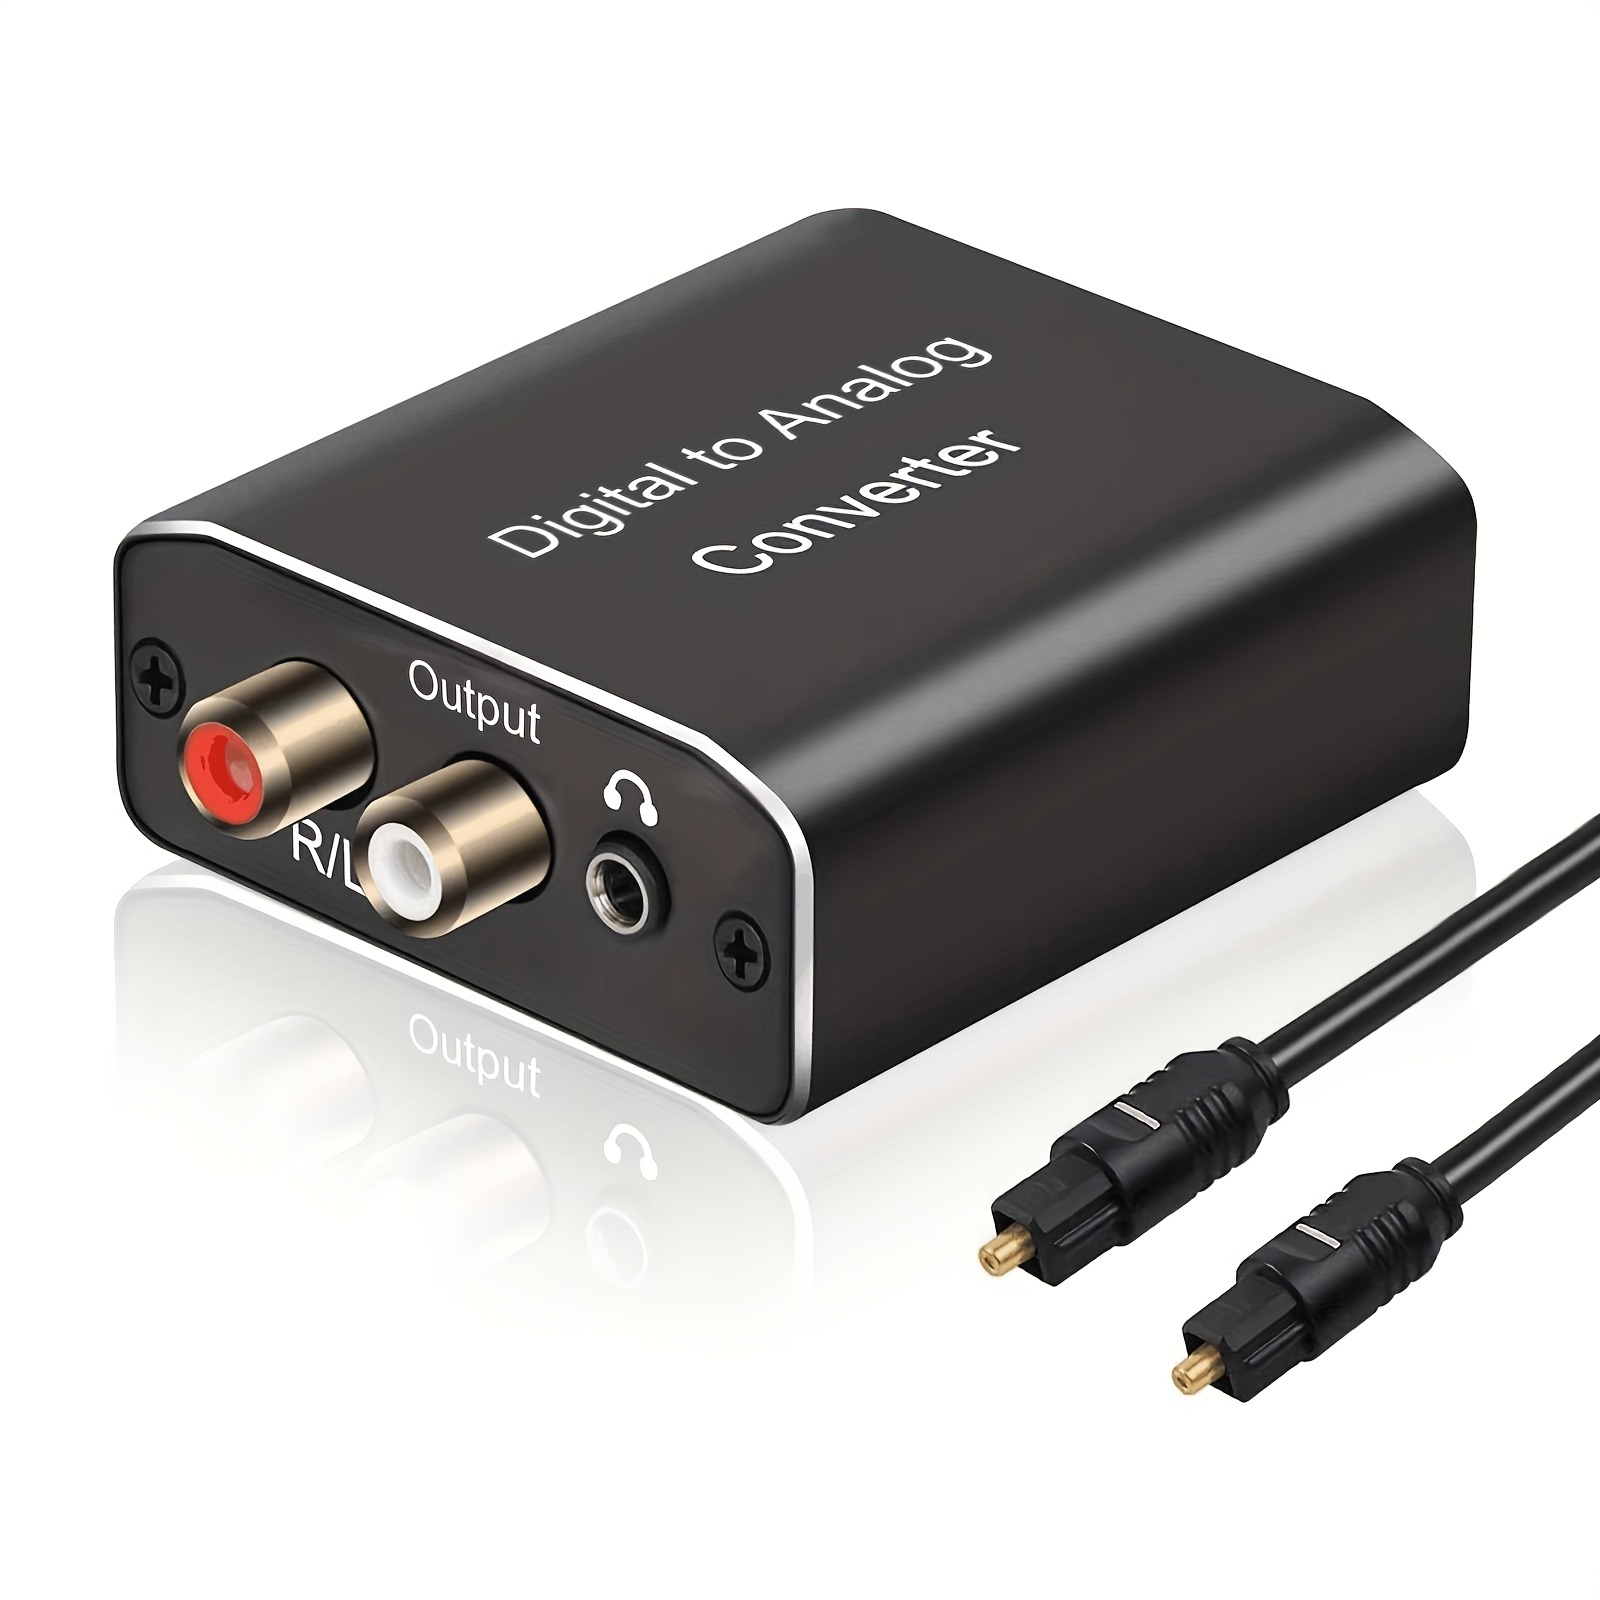 

Digital To Analog Audio Converter Dac Digital Spdif Optical To Analog L/r Rca Converter Toslink Optical To 3.5mm Jack Adapter For Ps3 Hd Dvd Ps4 Amp Tv Home Cinema